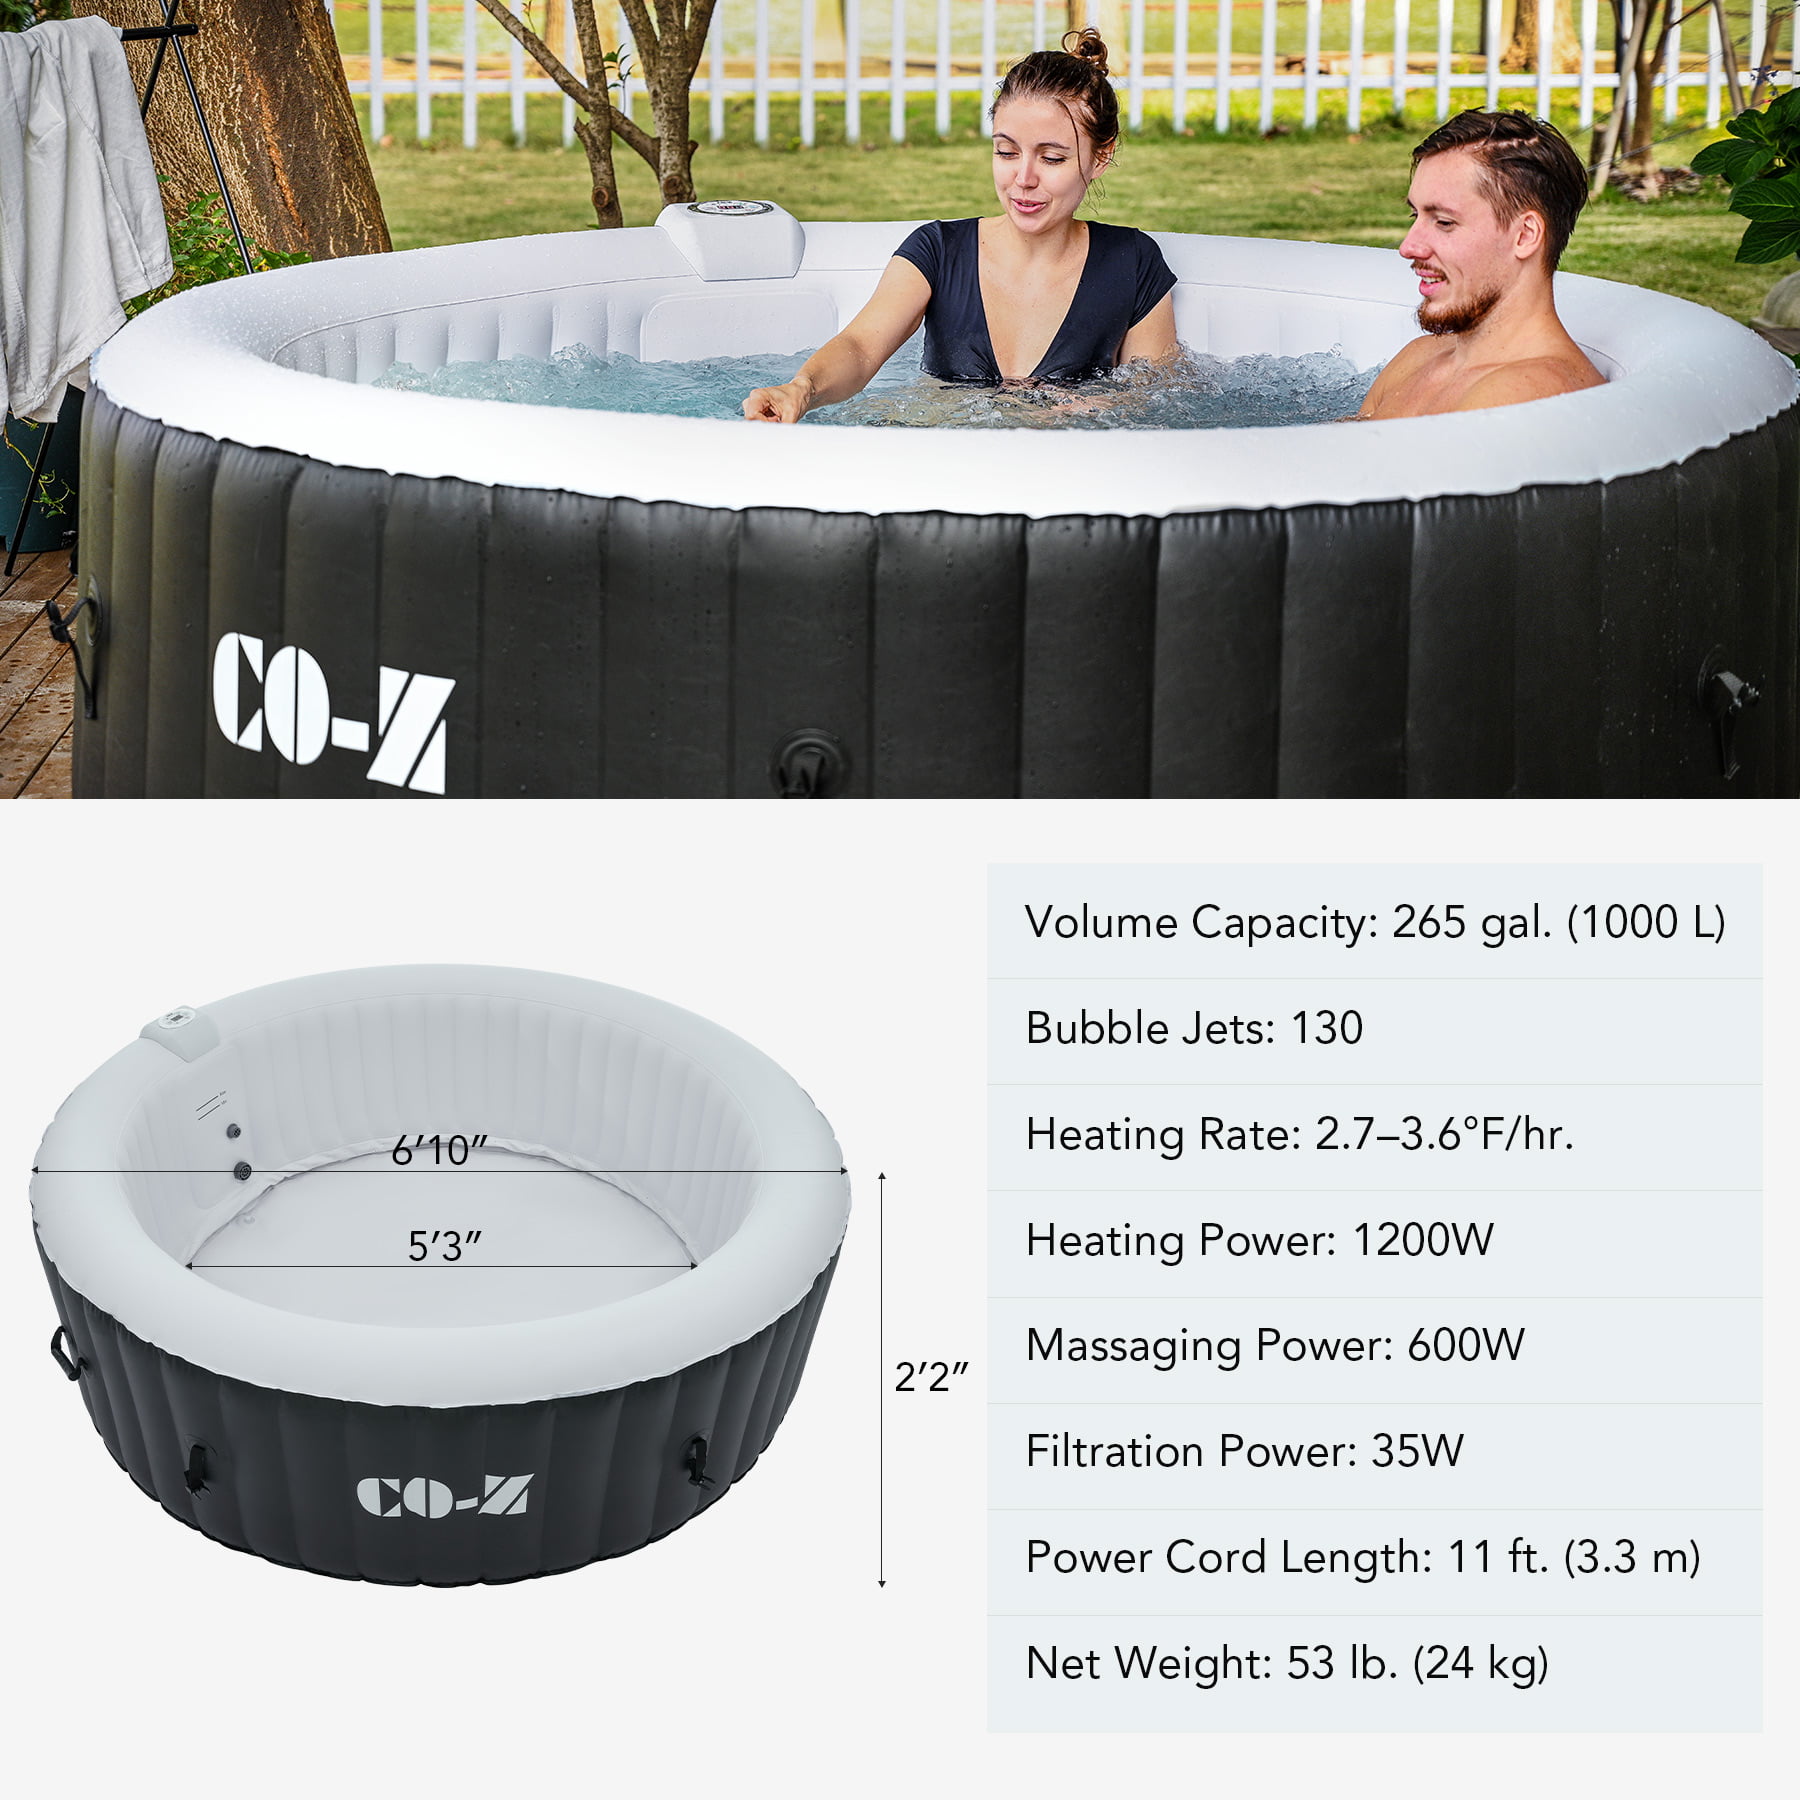 6 Person Blow Up Portable Hot Tub with 130 Bubble Jets Cover Grey CO-Z Inflatable Hot Tub 7' Outdoor Above Ground Pool and Bathtub with Electric Air Pump for Patio Backyard 